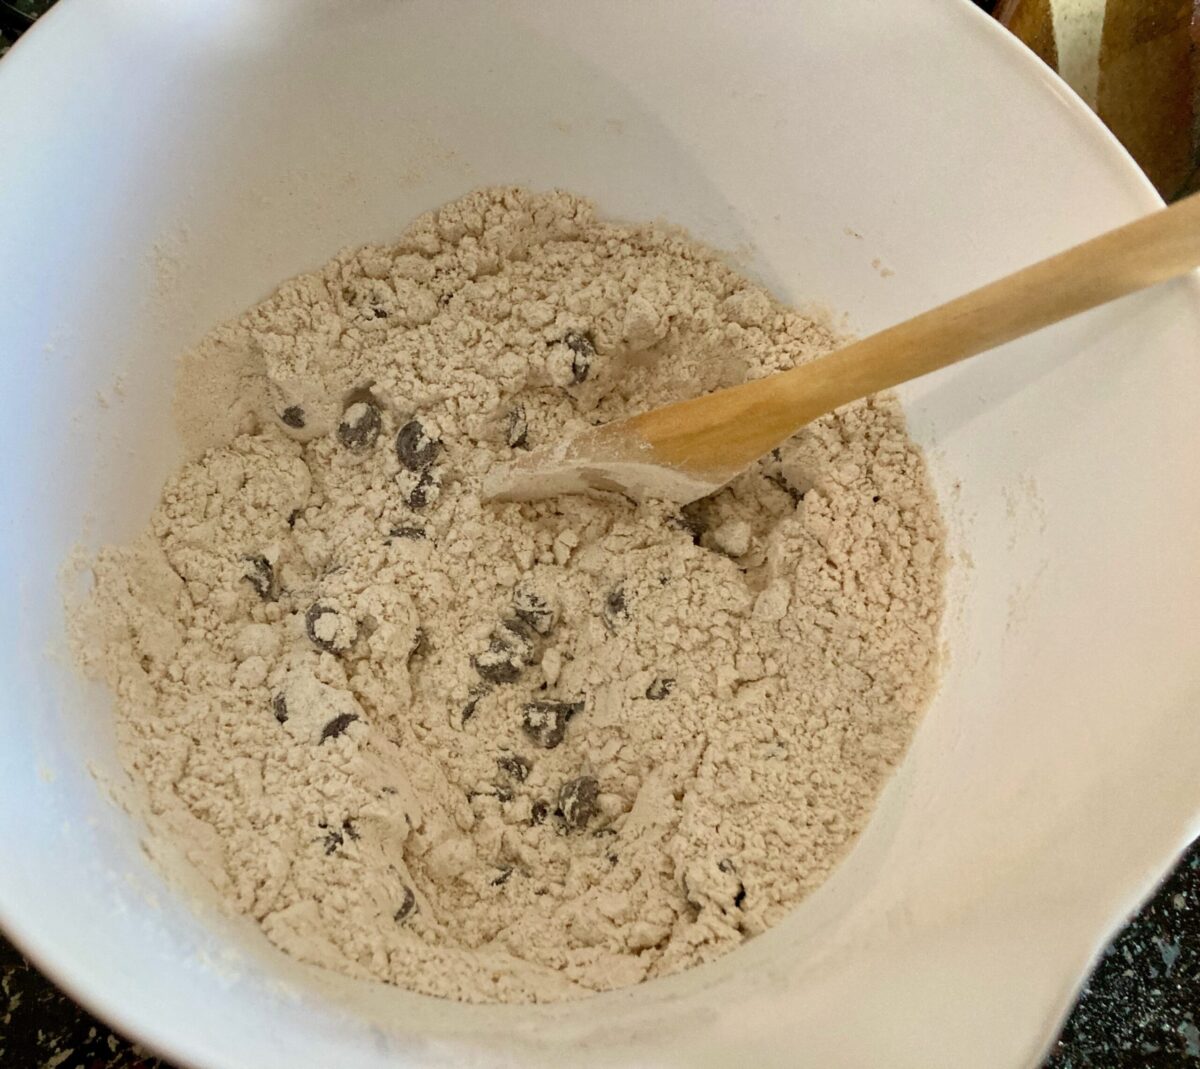 Mixing gingerbread dry ingredients in mixing bowl with wooden spoon.